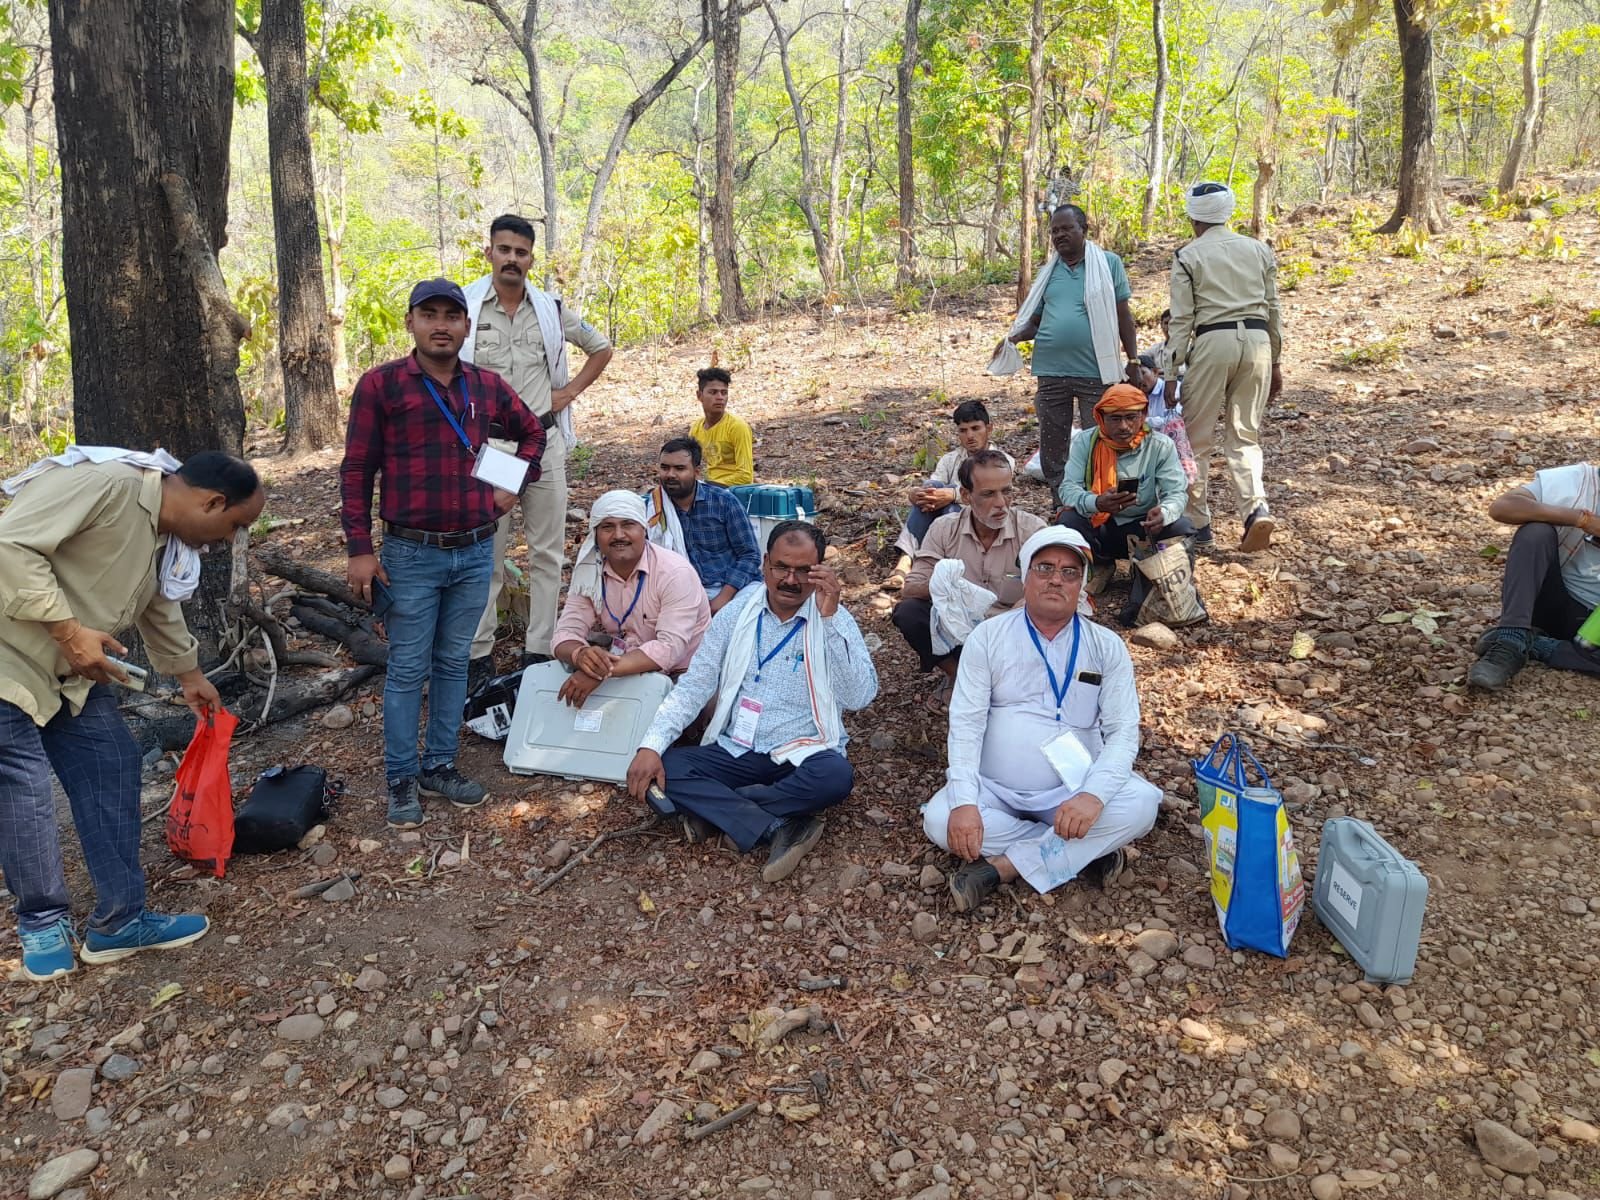 Polling personnel walked a distance of about 8 km to conduct voting at polling booth Baragaon, located in the rugged hilly area of ​​Gadarwara in Hoshangabad parliamentary constituency. (X)